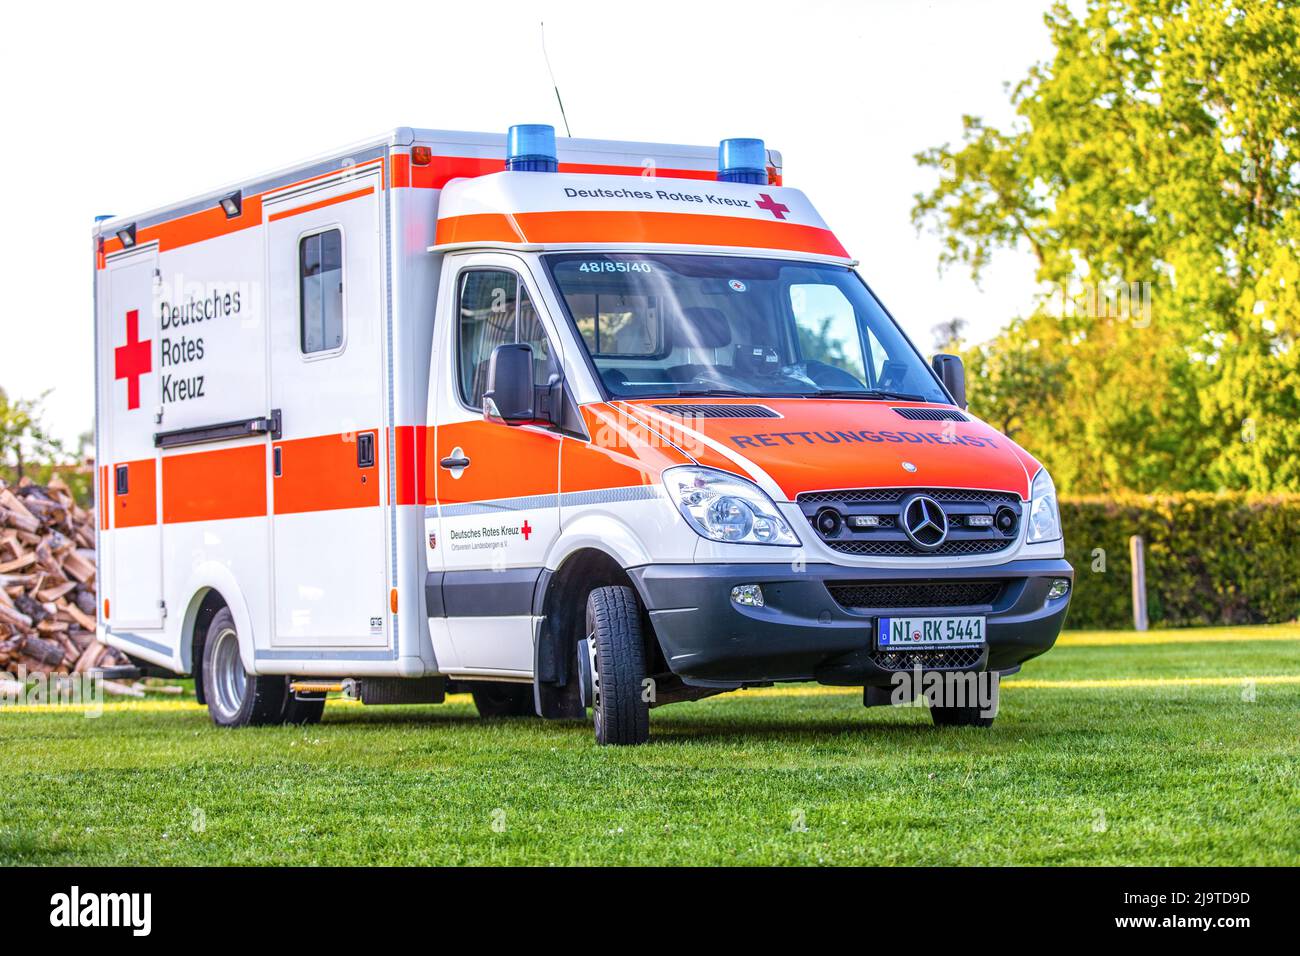 Landesbergen, Germany. May 11, 2022: Ambulance from the German Red Cross. The German Red Cross (German: Deutsches Rotes Kreuz is the national Red Cros Stock Photo